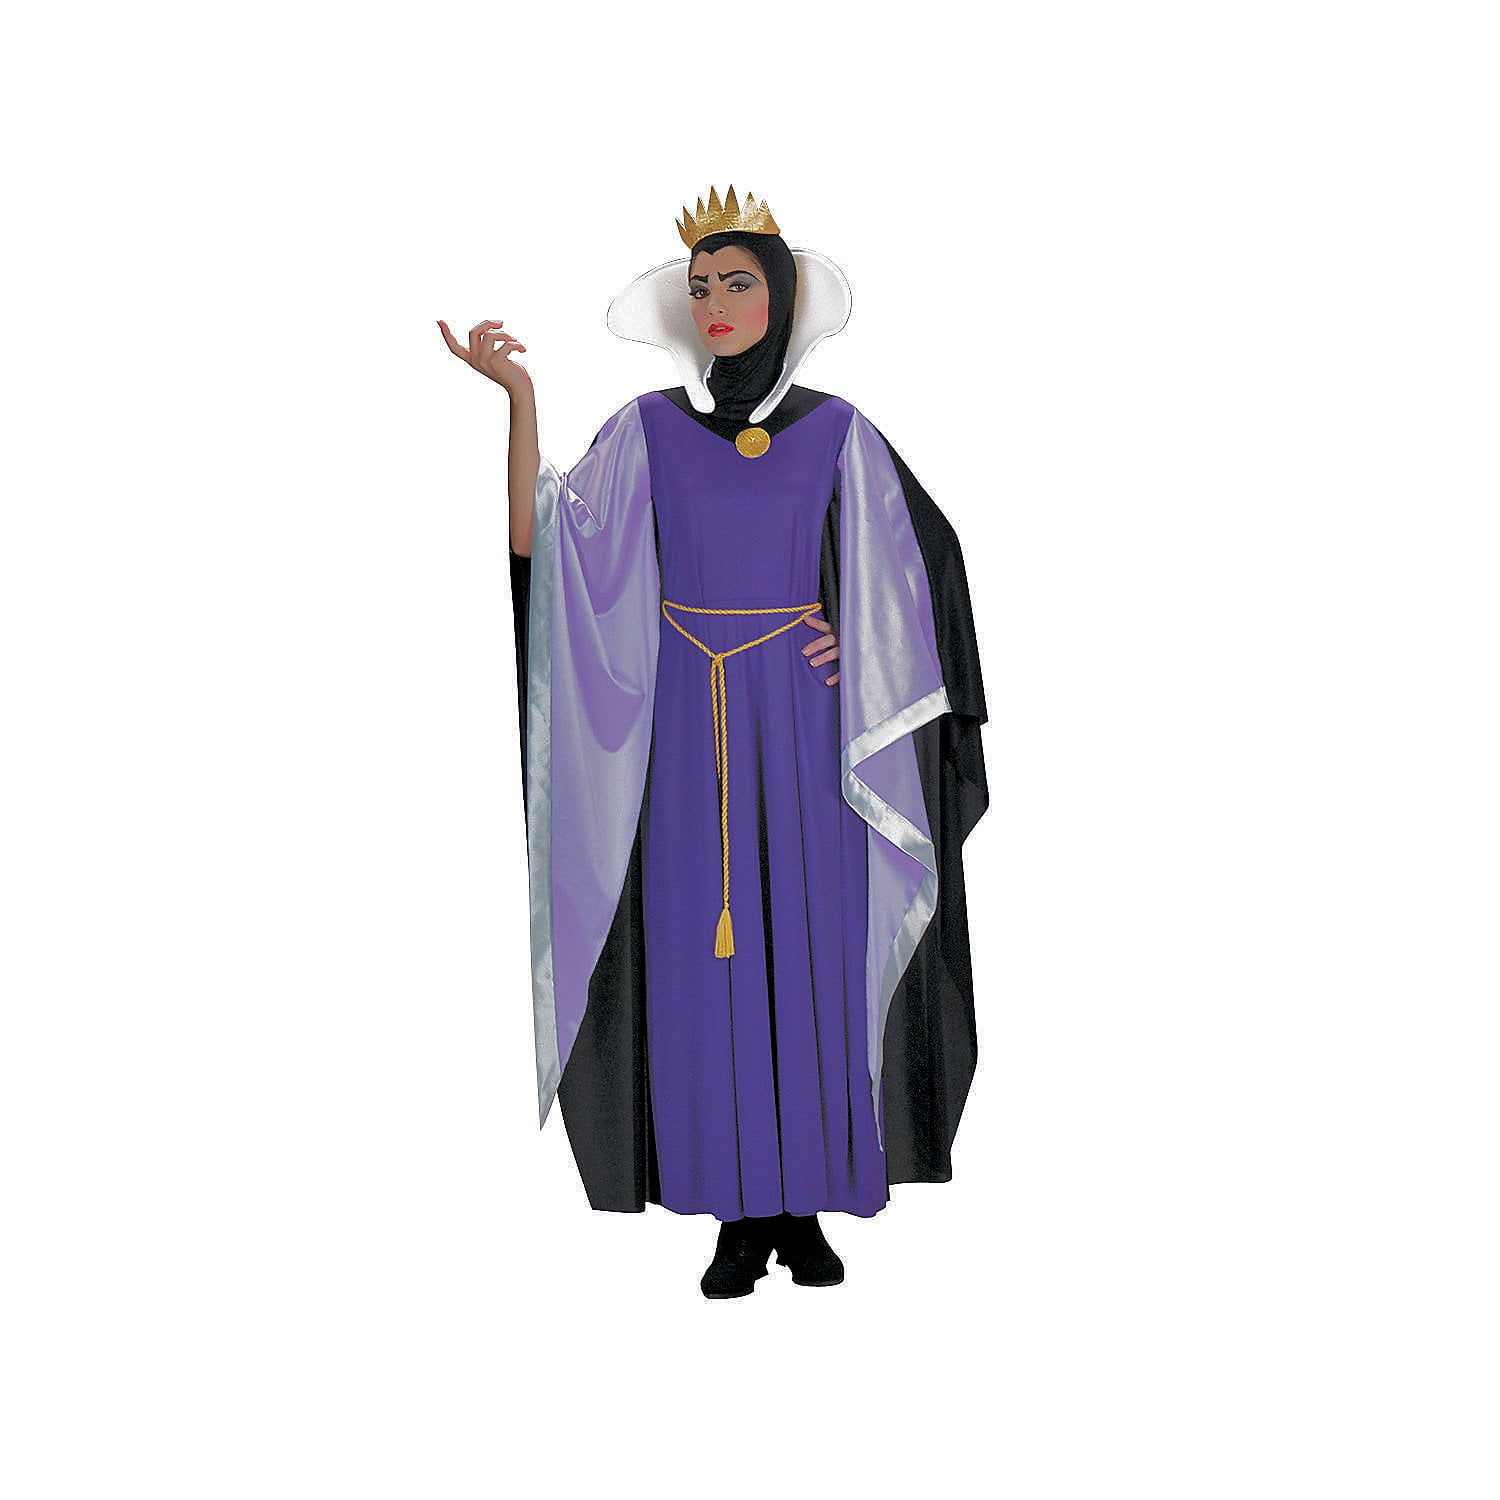 Chris Villains Snow White  Cosplay costumes for men, Cosplay outfits,  Disney cosplay